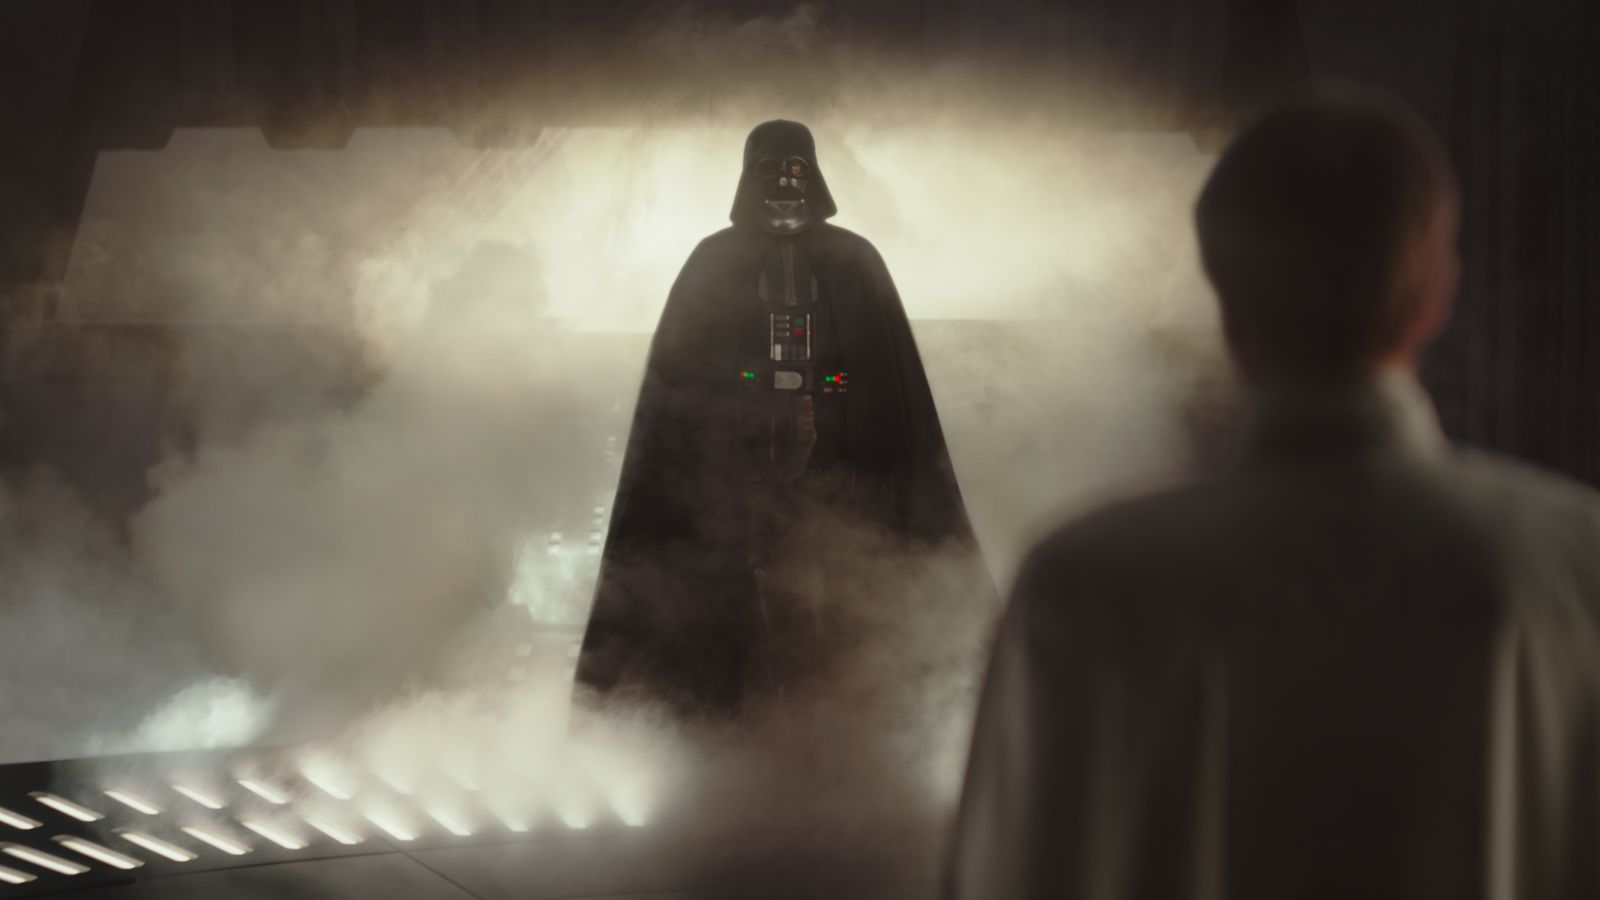 Rogue One's Darth Vader is the most melodramatic we've seen yet